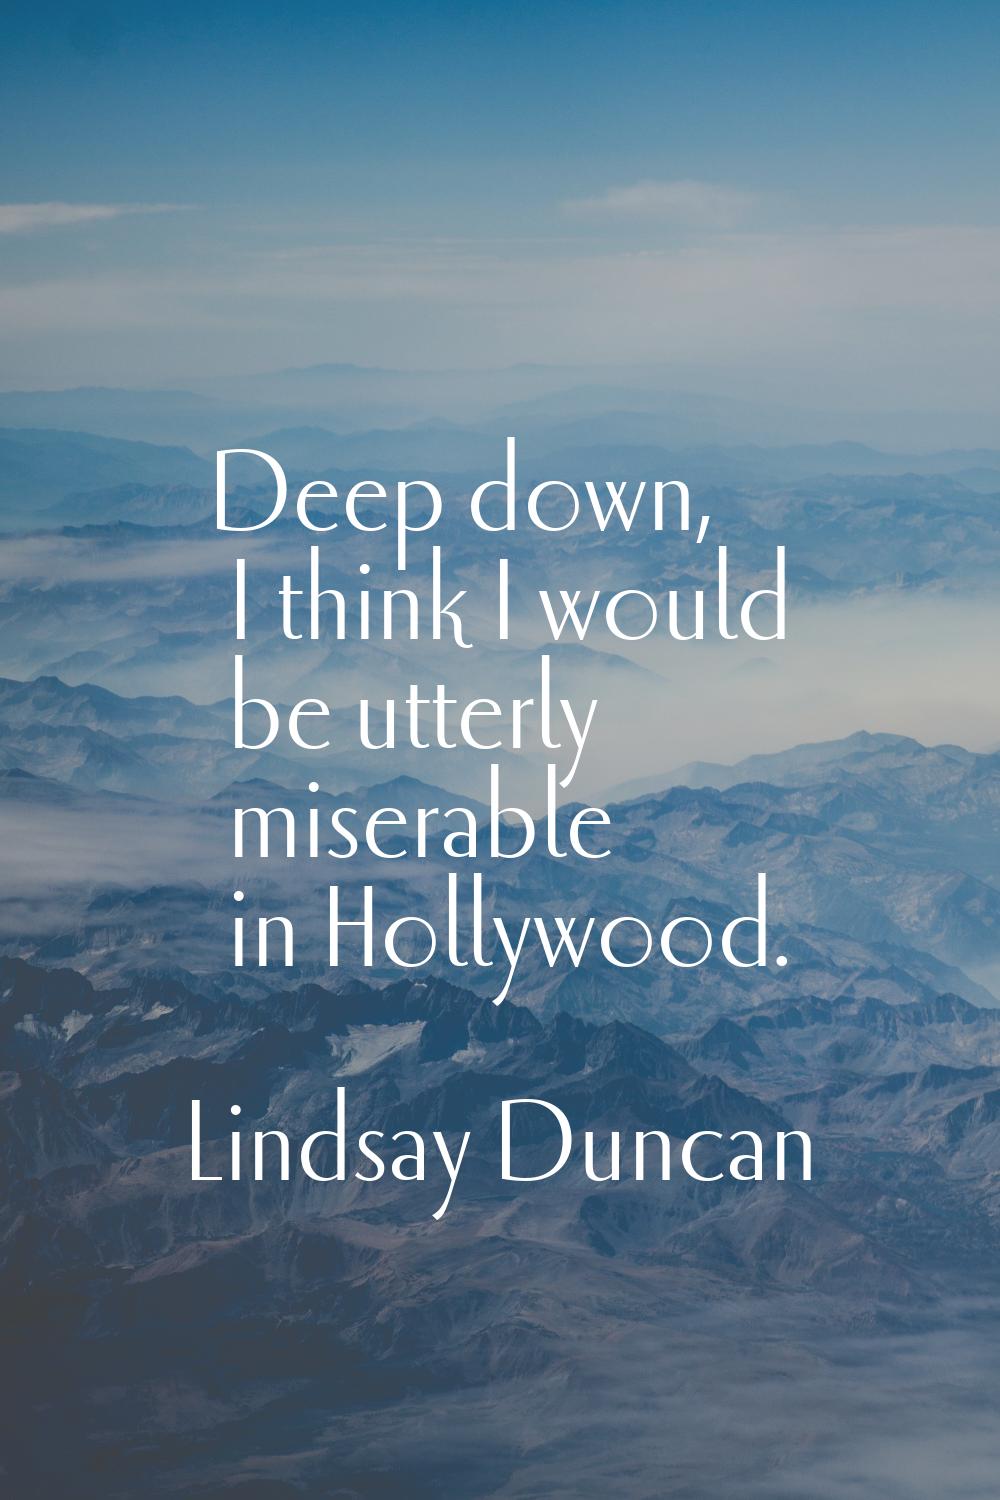 Deep down, I think I would be utterly miserable in Hollywood.